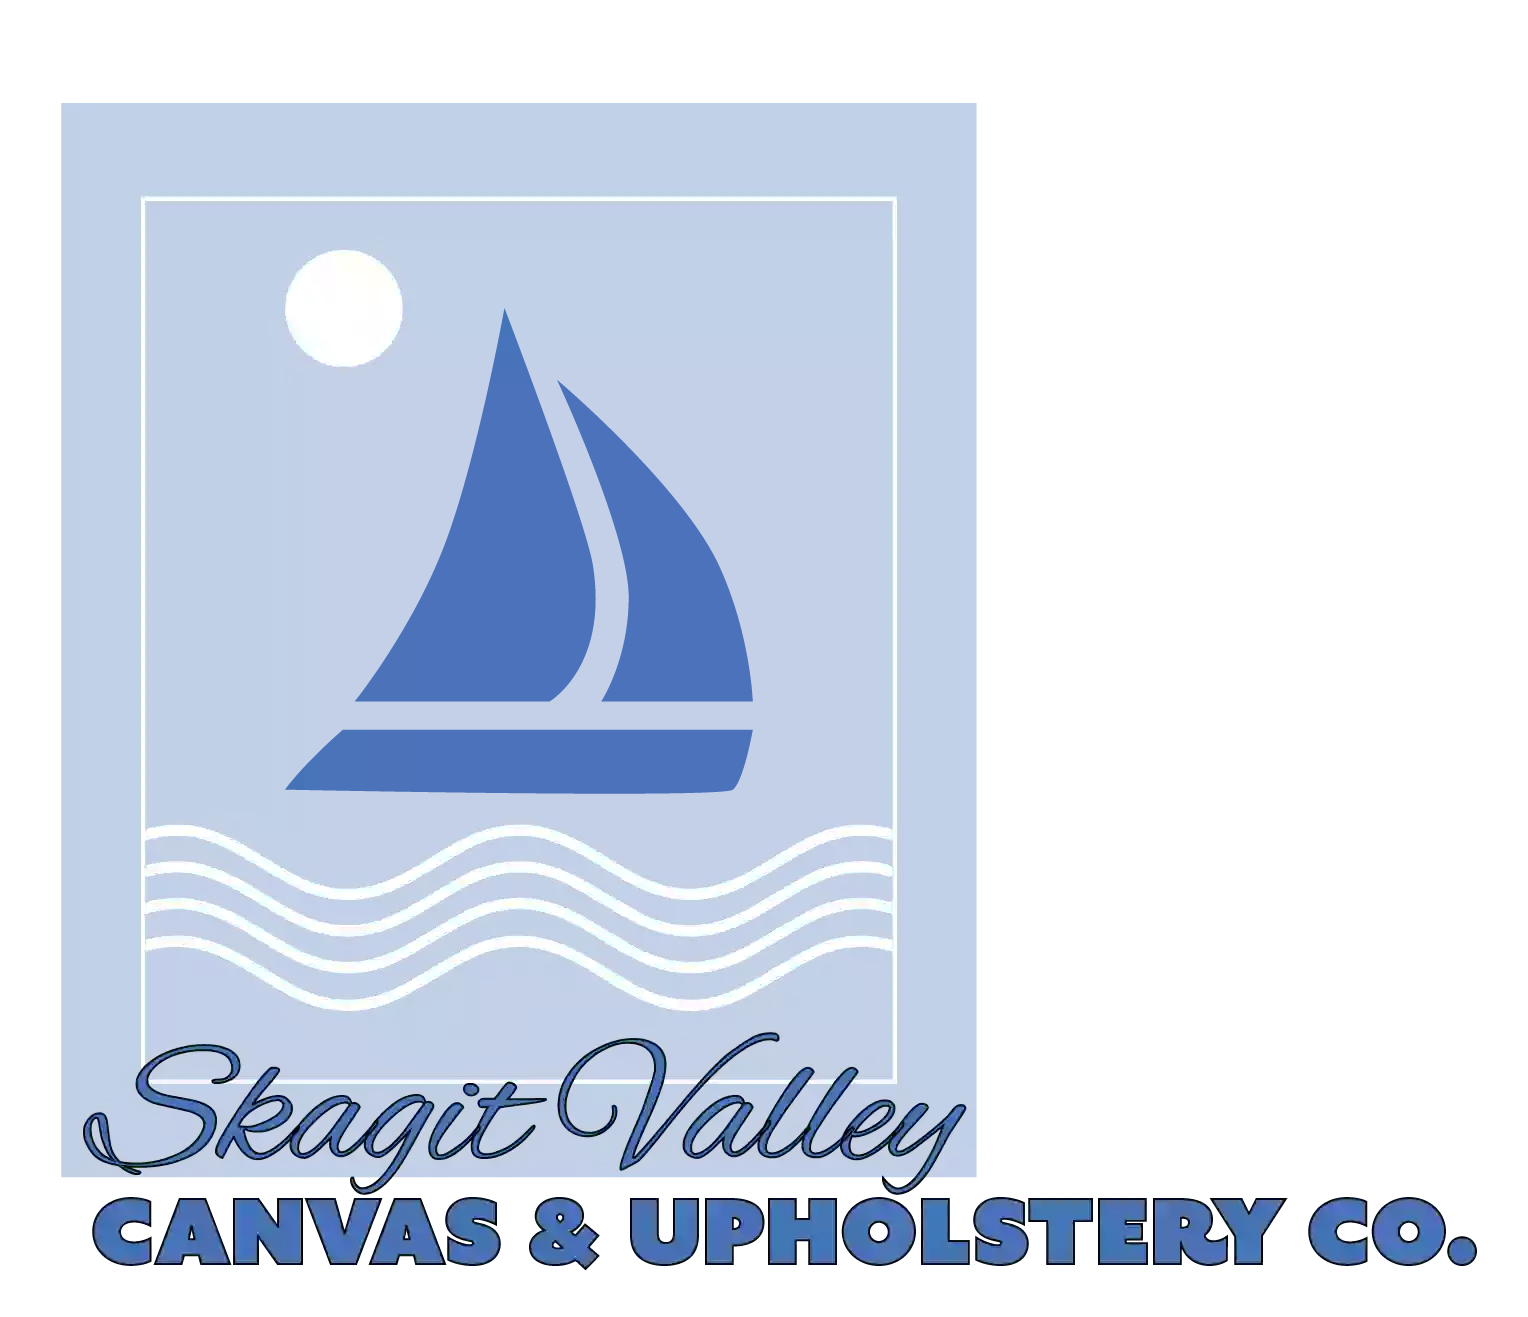 Skagit Valley Canvas & Upholstery Co.